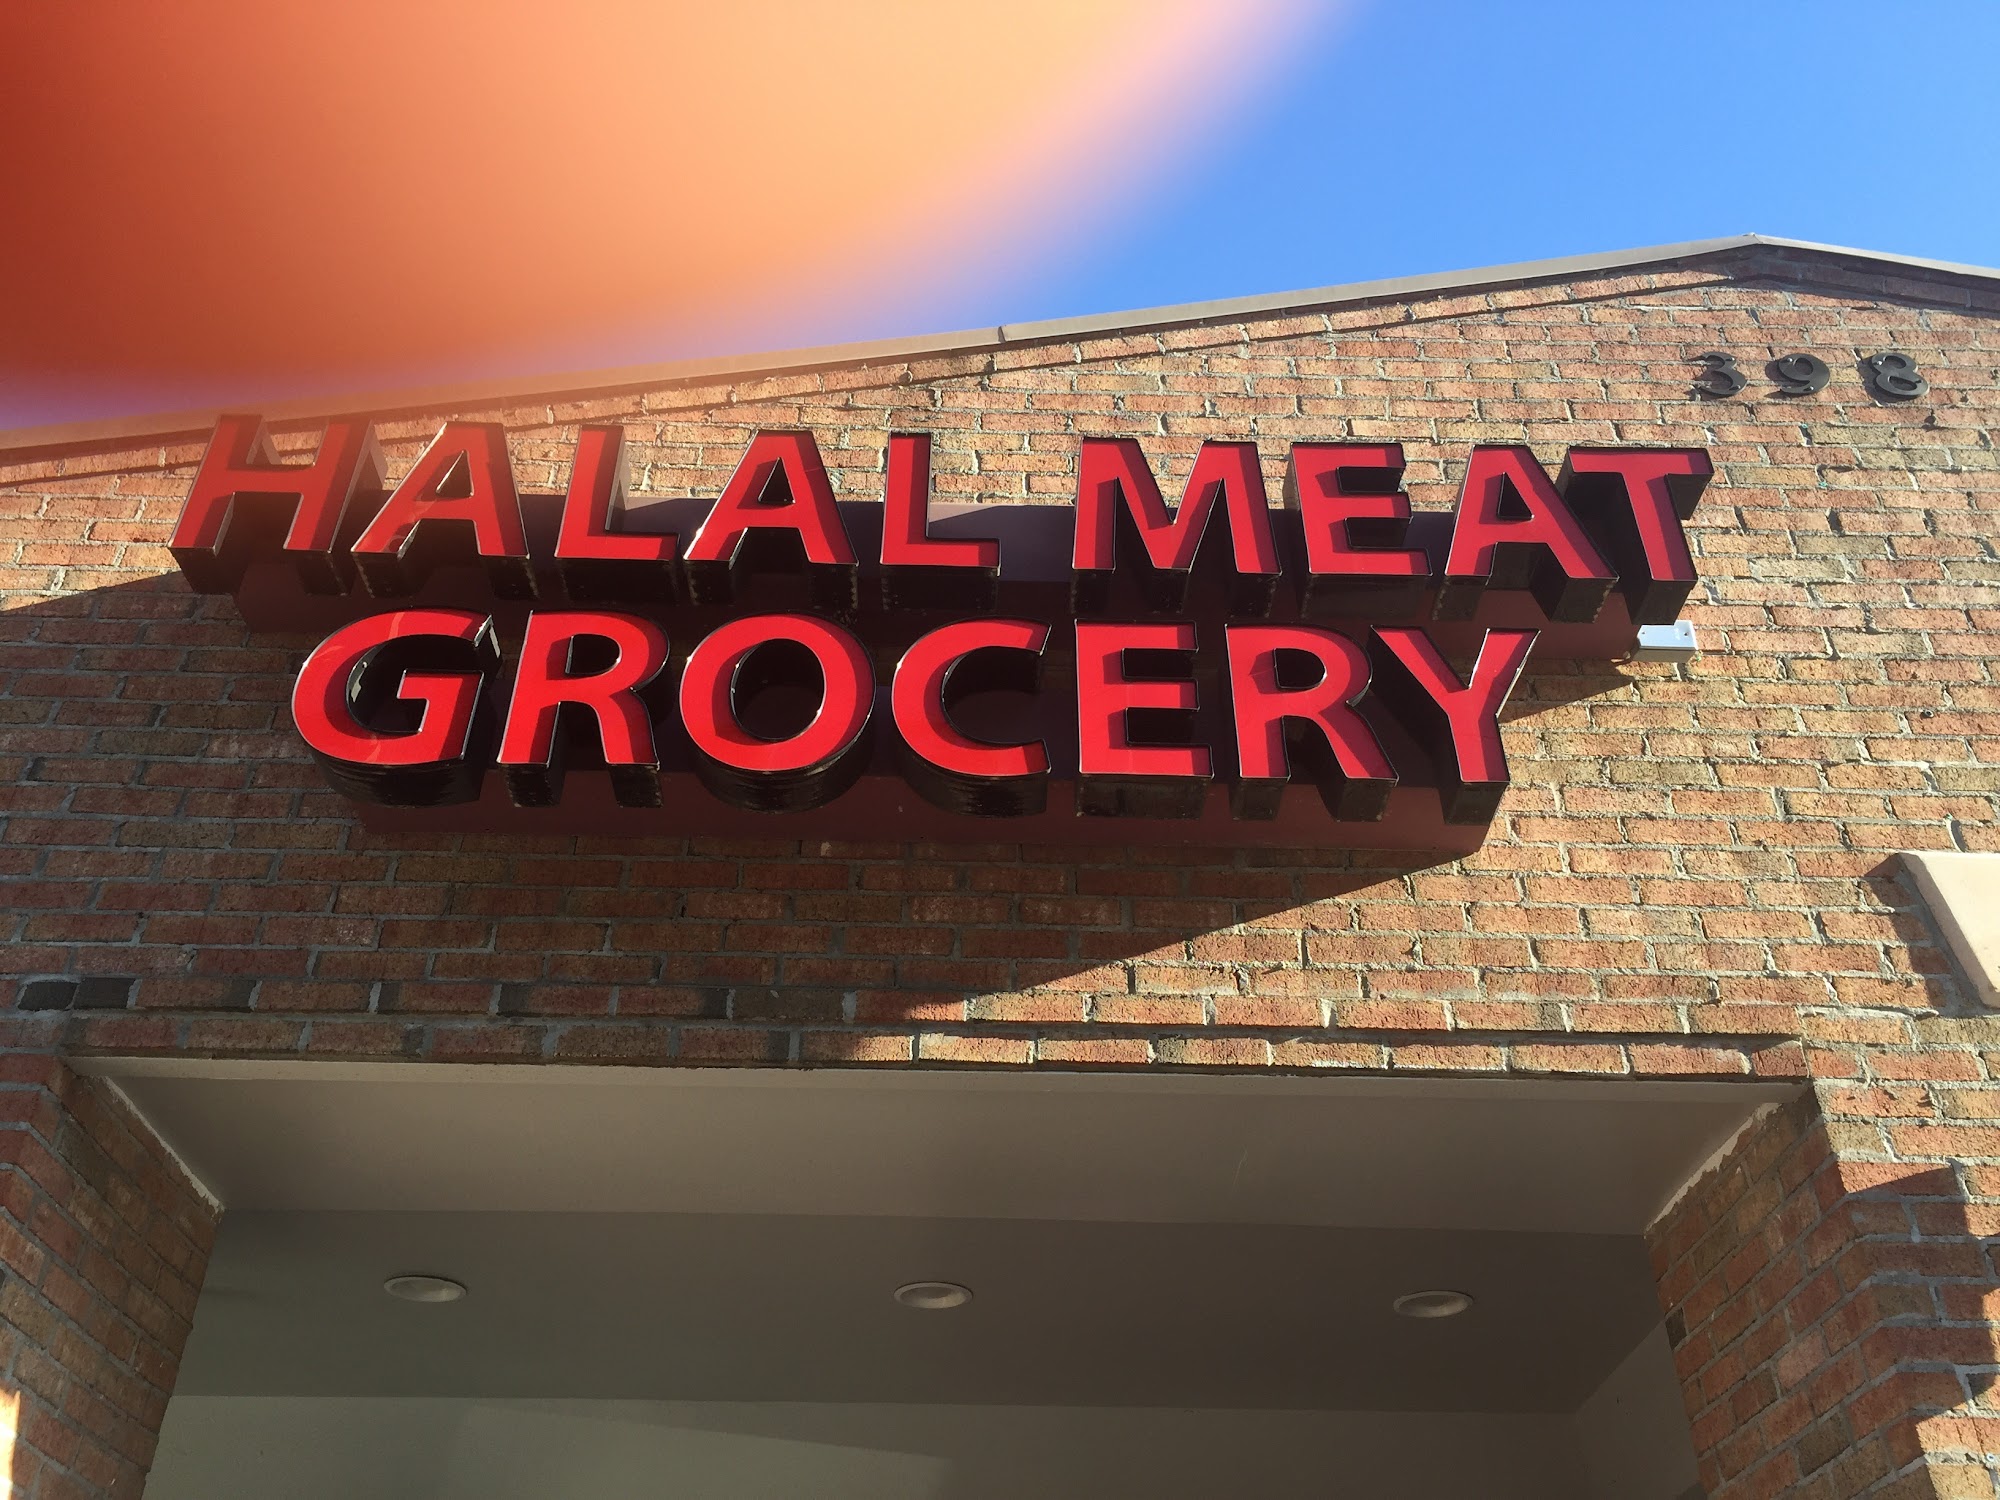 14 TH ST GROCERY AND HALAL MEAT